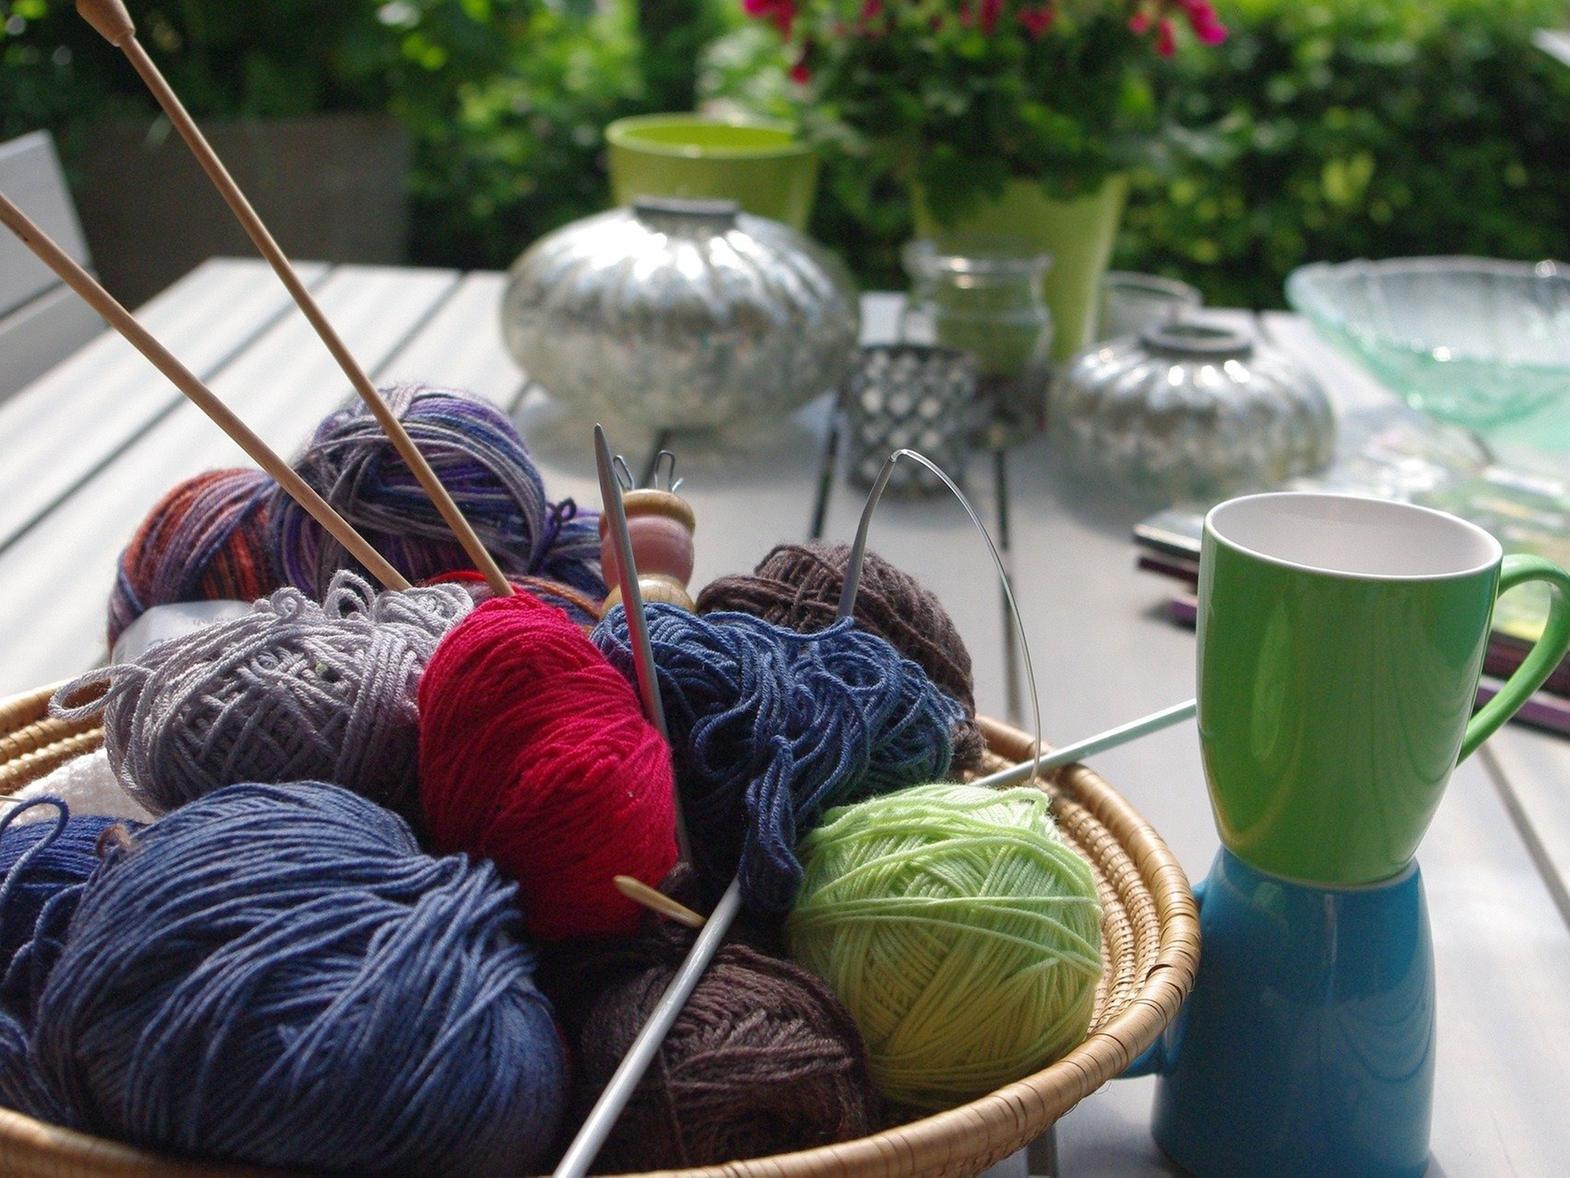 Lancashire Recommends looks at some of the best crafty workshops in Lancashire